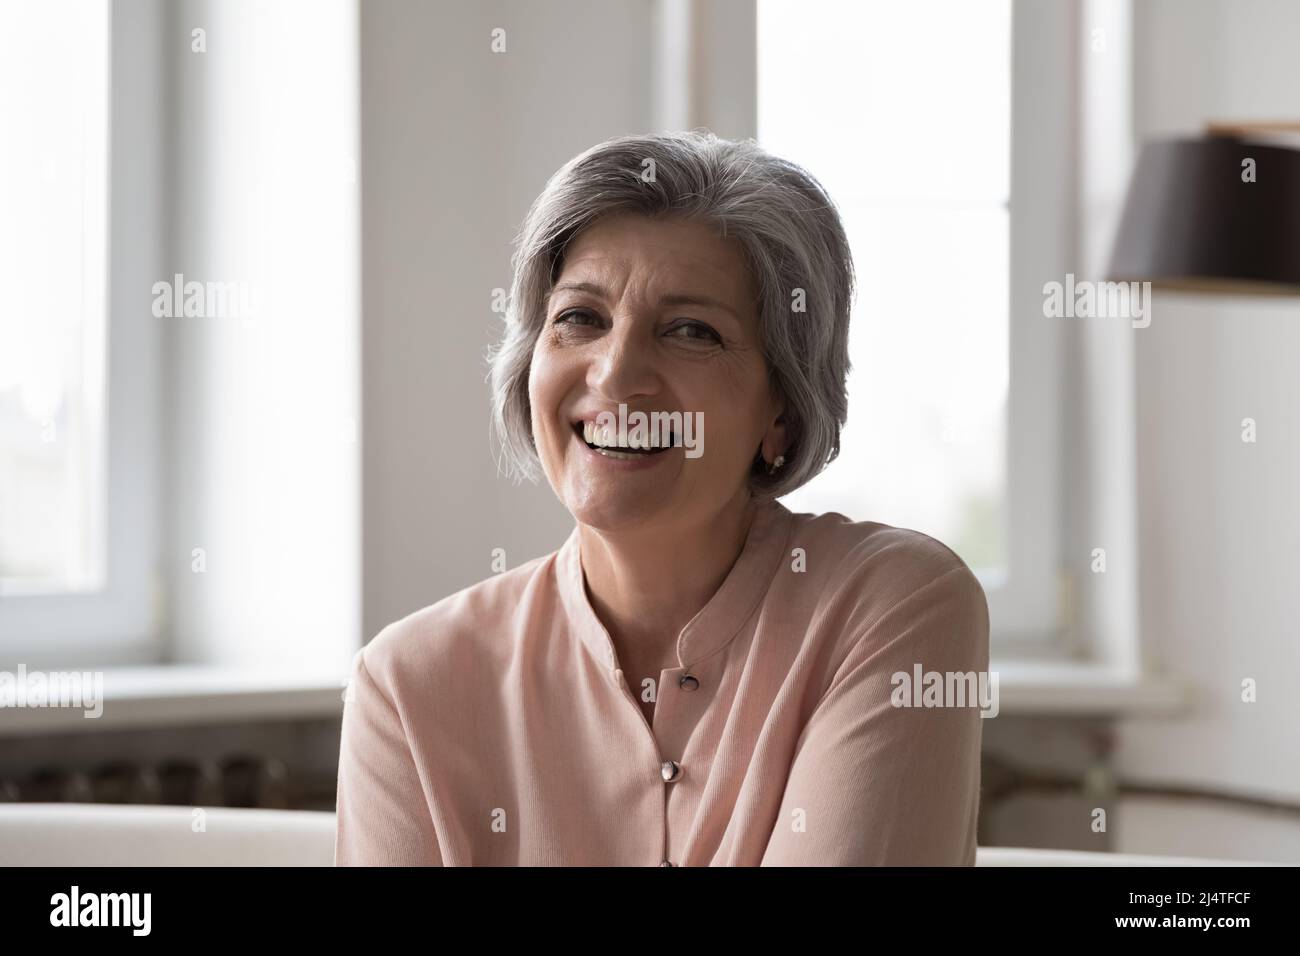 Headshot portrait attractive older woman smile look at camera Stock Photo